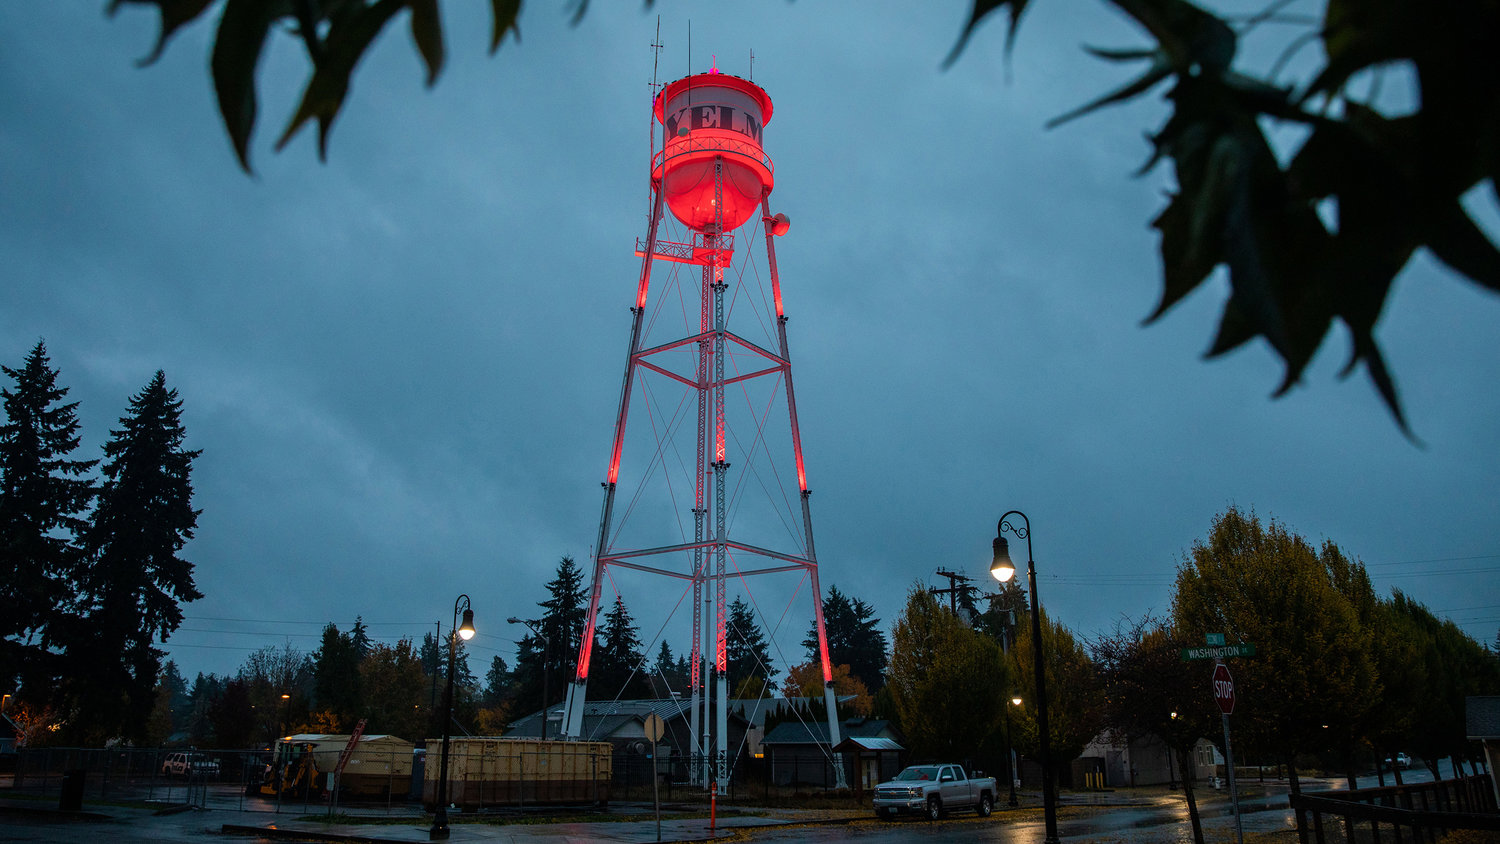 The Yelm Water Tower is pictured in this file photo.